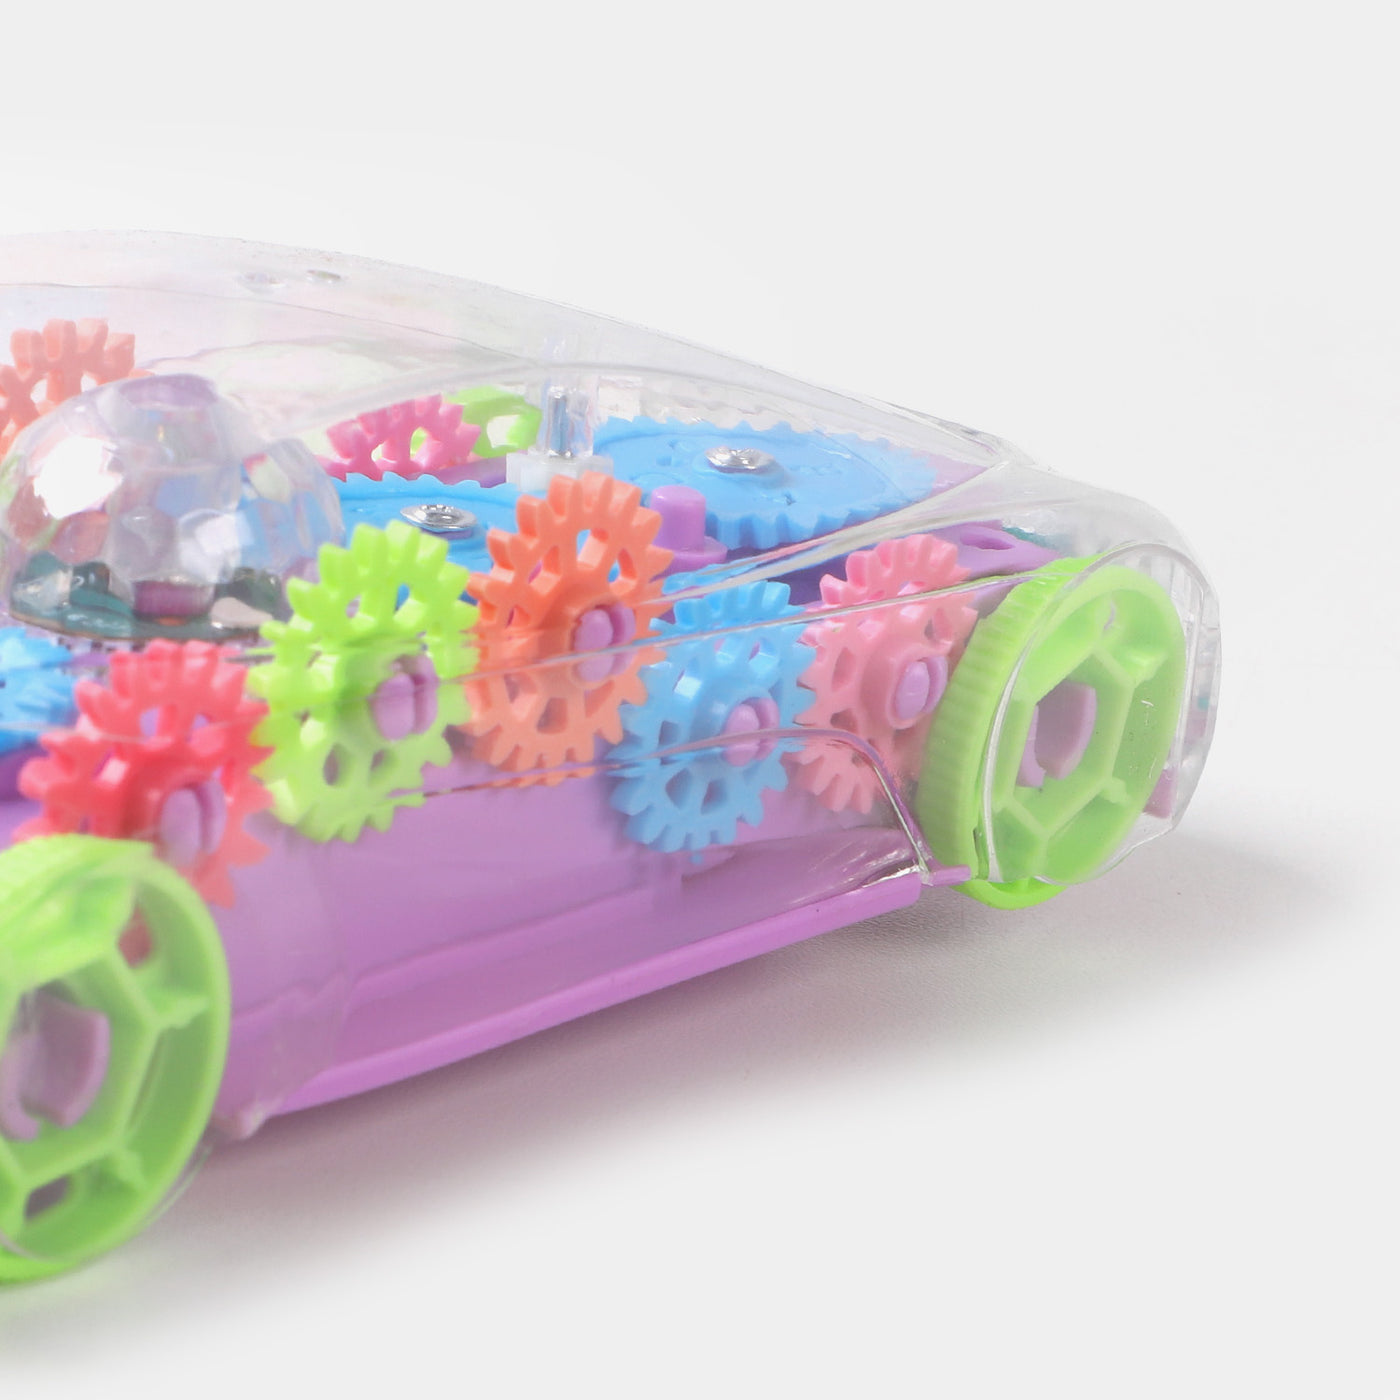 Gear Car Toy For Kids